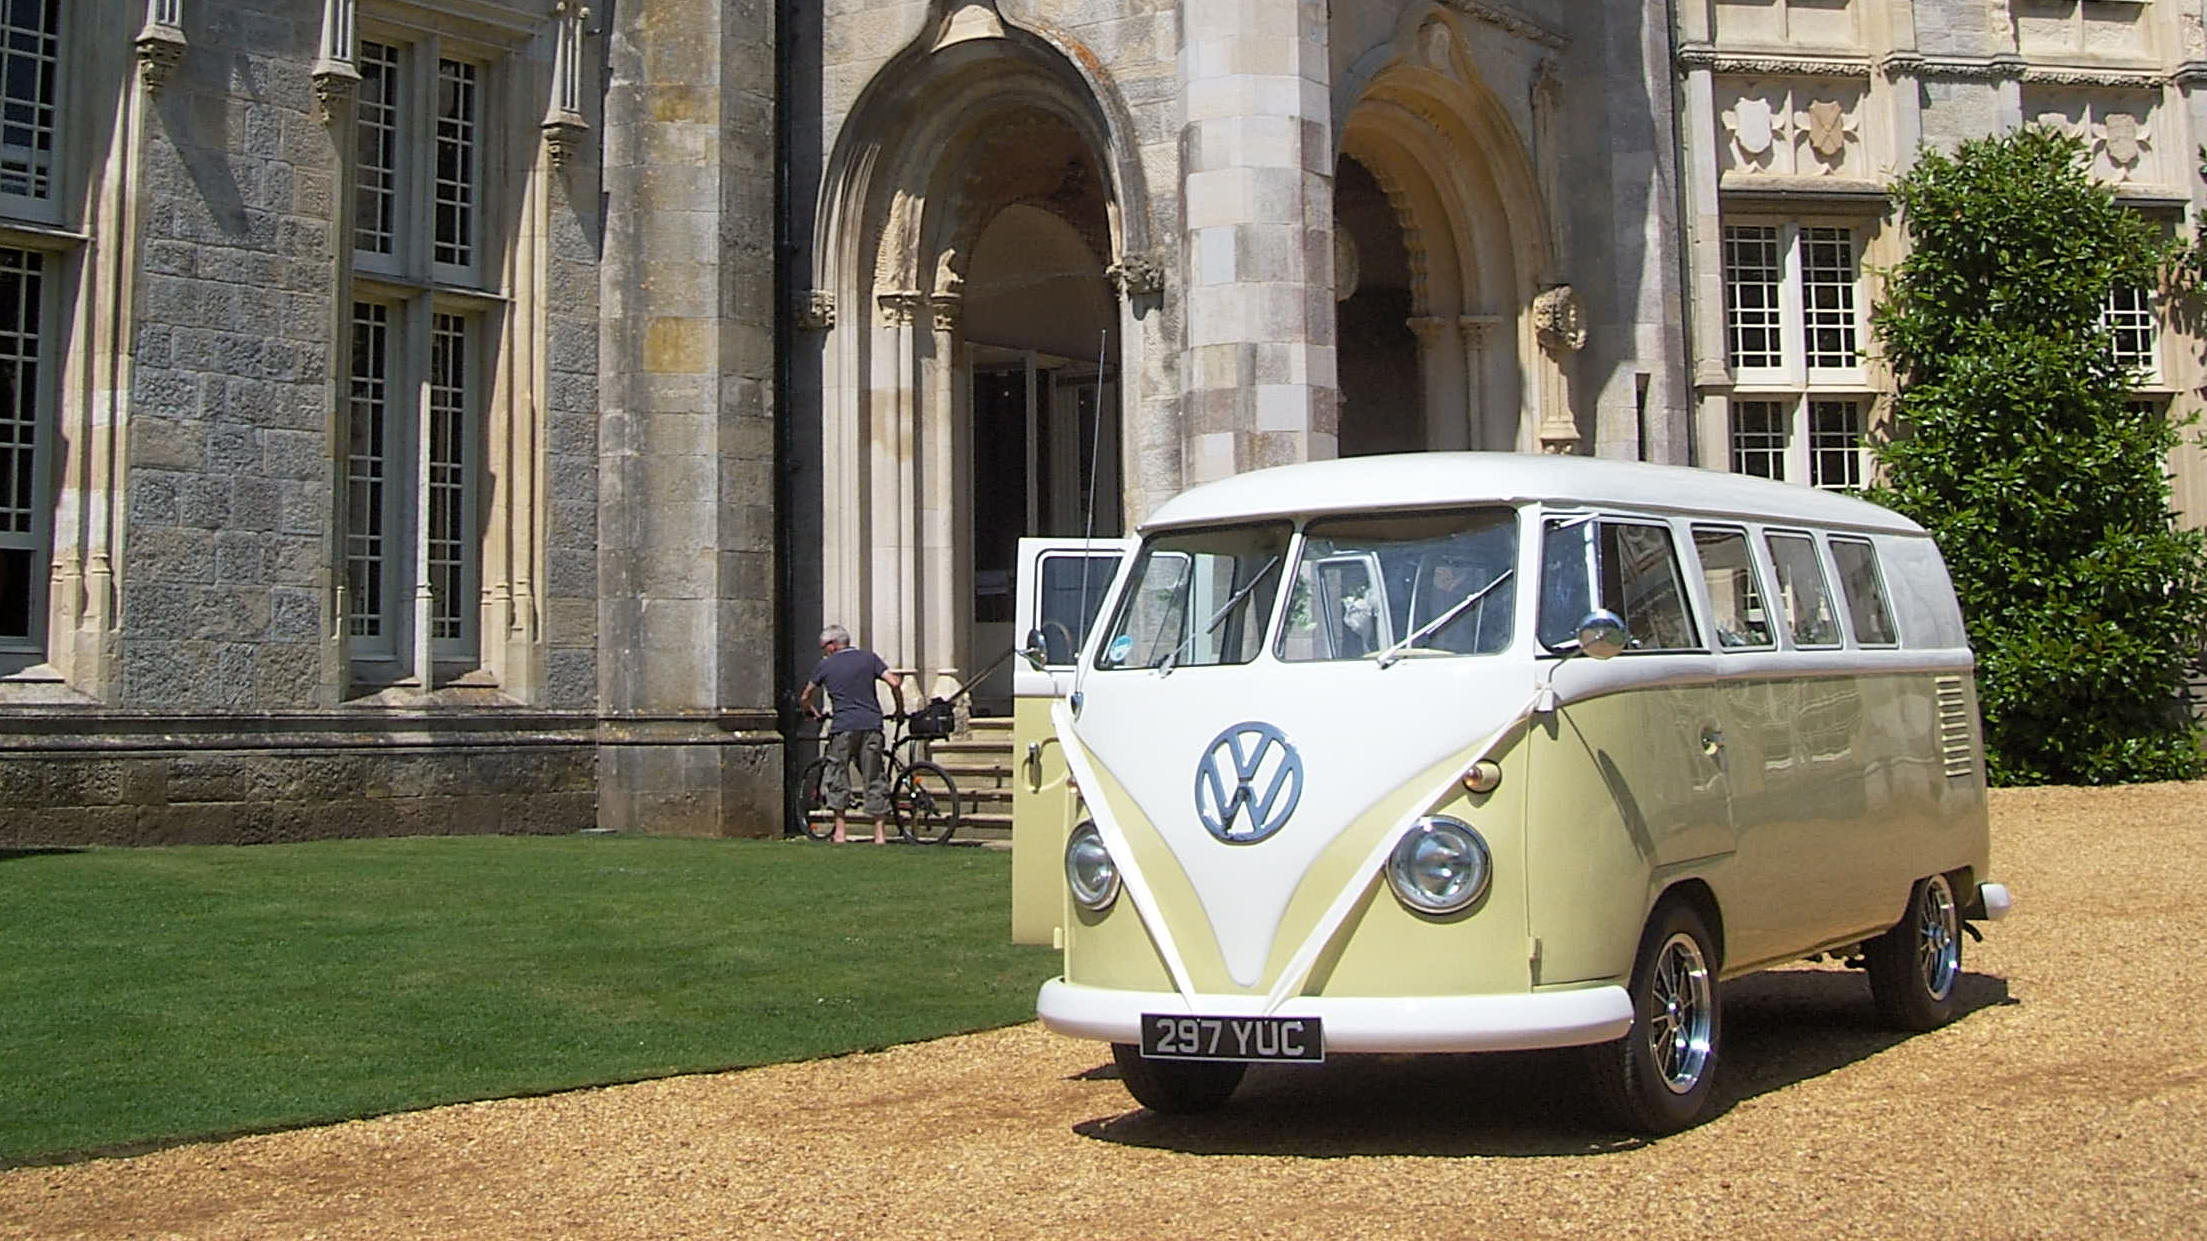 Retro Classic Volkswagen Campervan decorated with white ribbons at a local West Lulworth wedding venue.